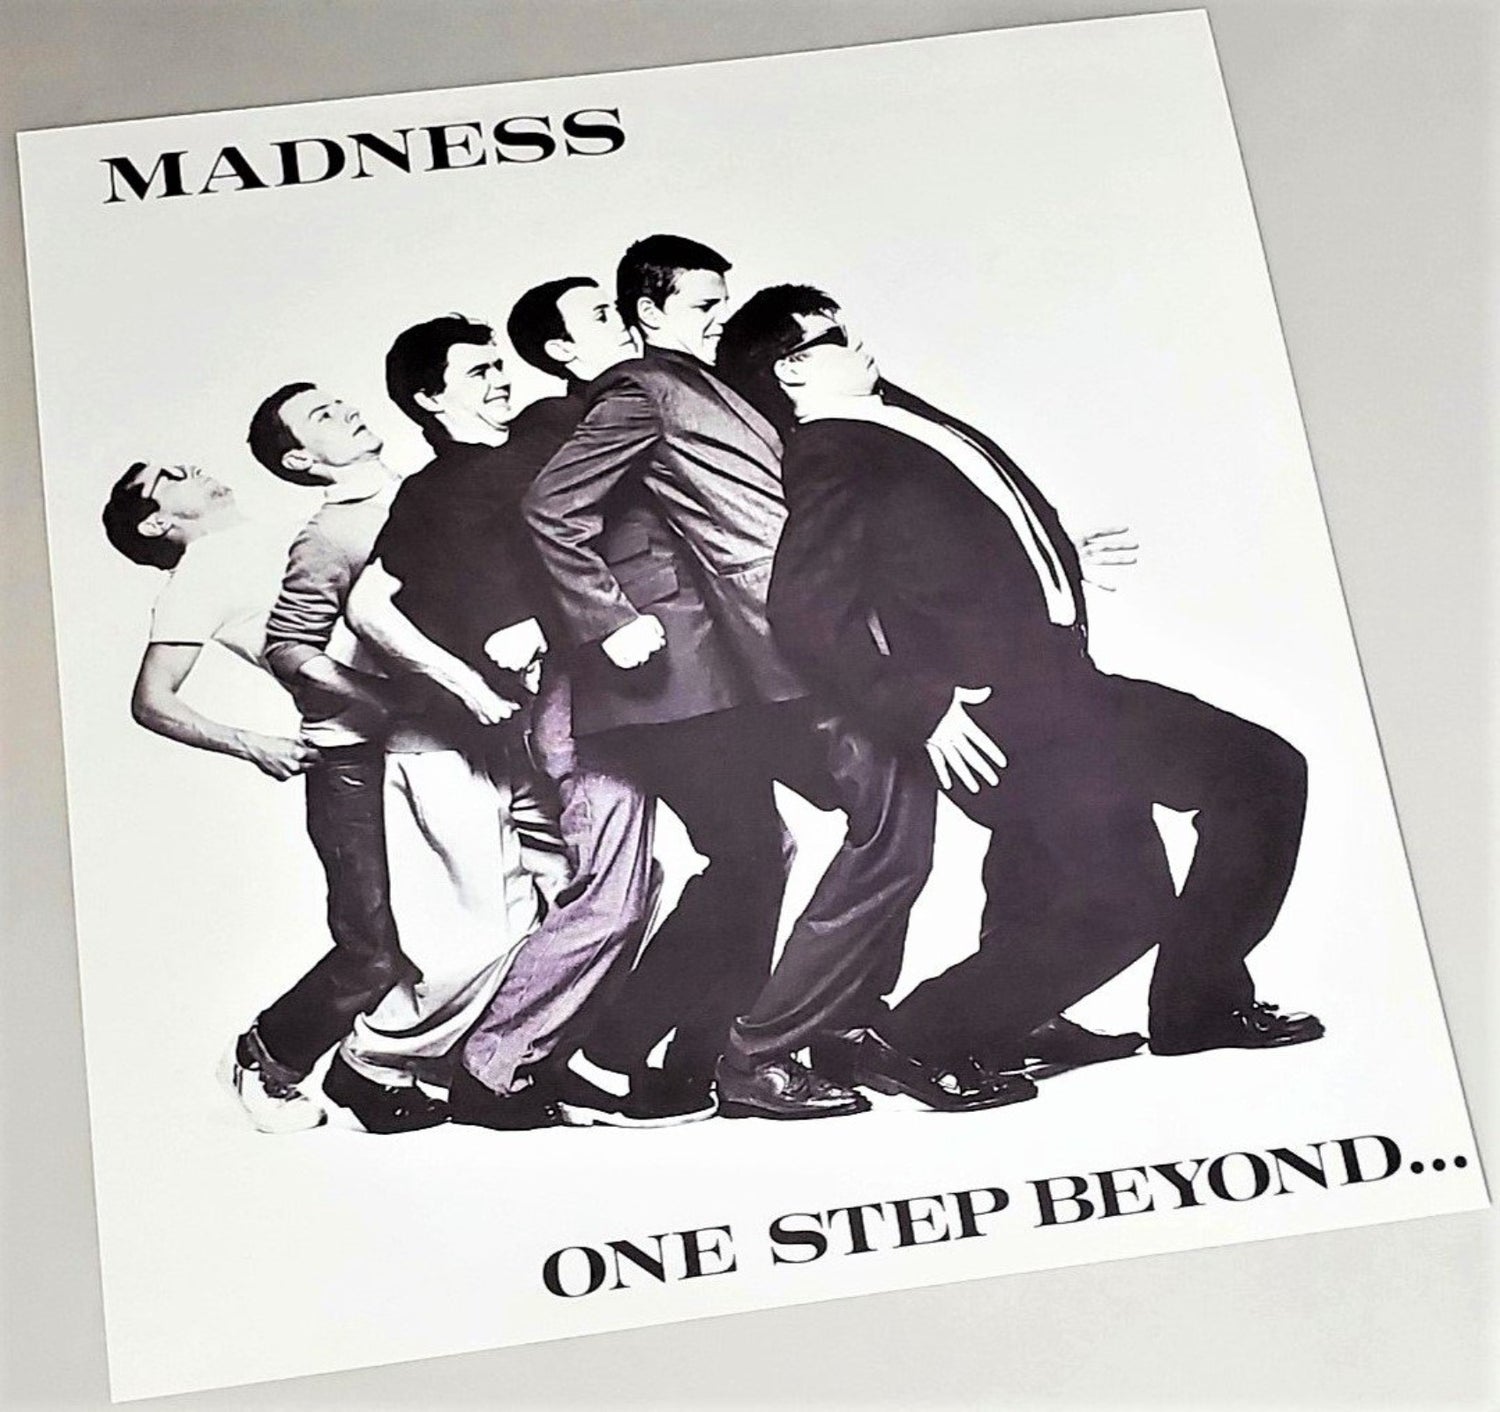 Madness 1979 One Step Beyond album cover art page featured in Rock Covers 2014 coffee table book